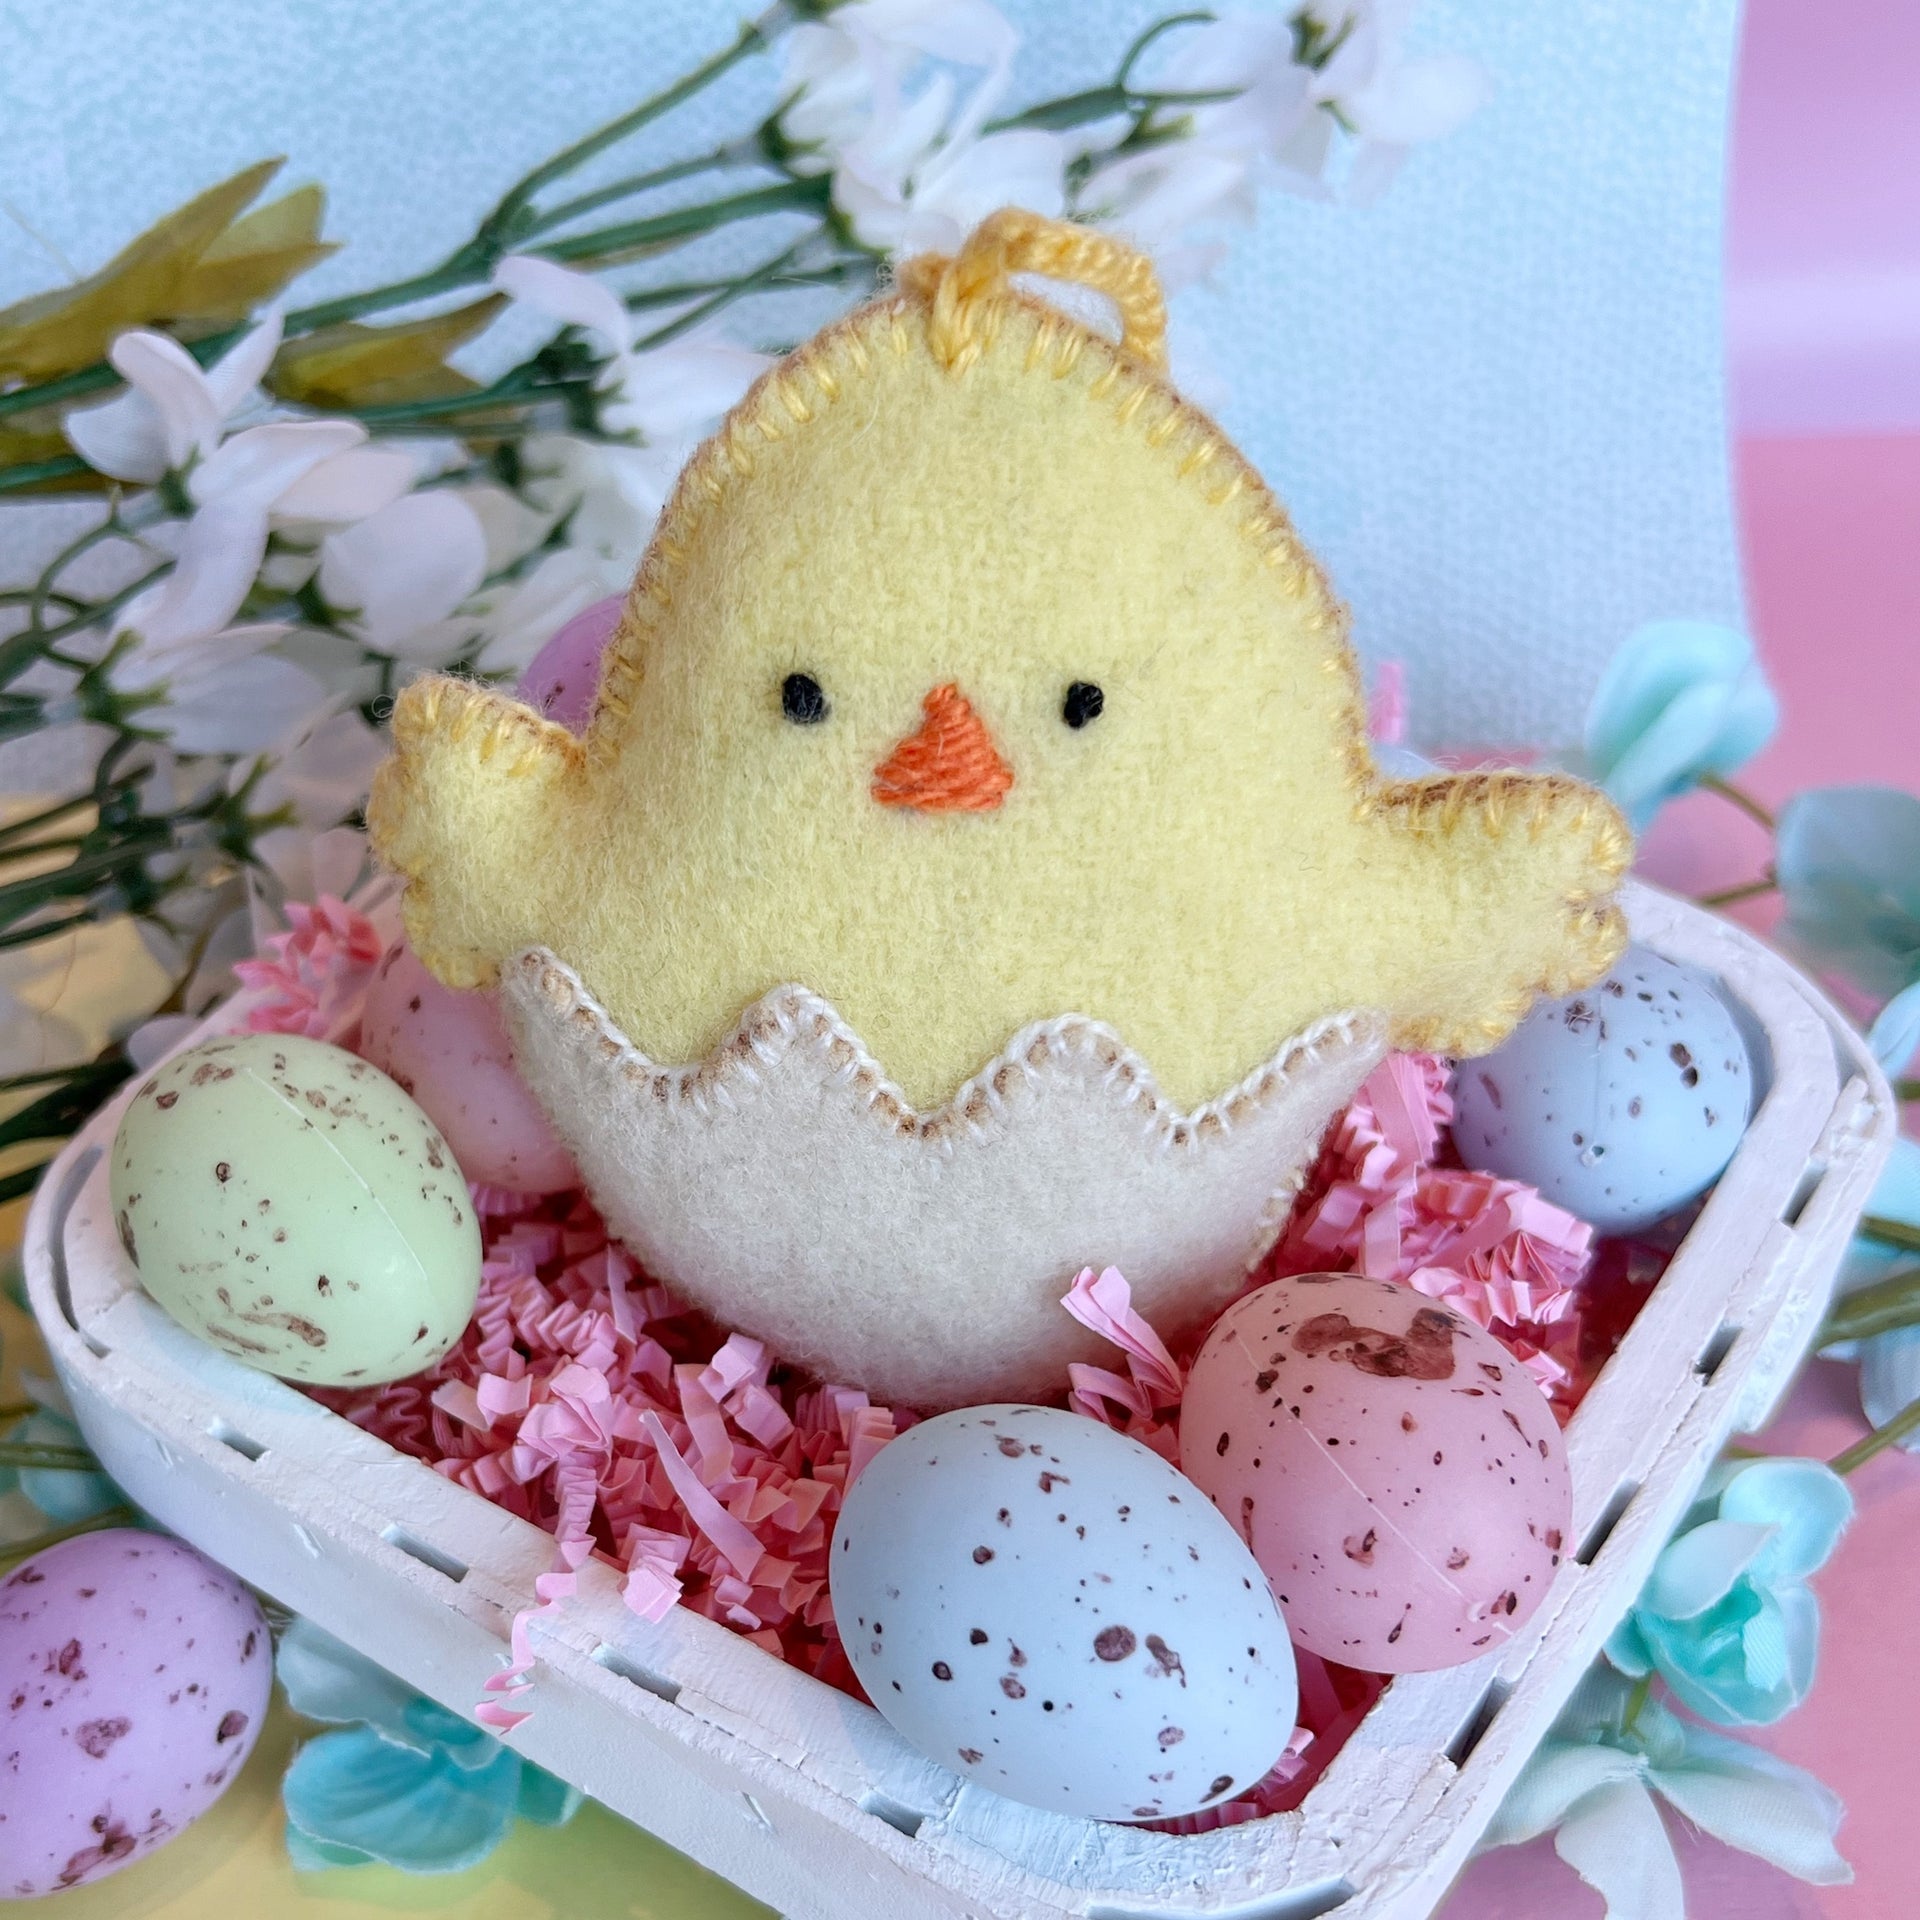 Handmade baby chick Easter ornament in basket surrounded by pastel eggs.